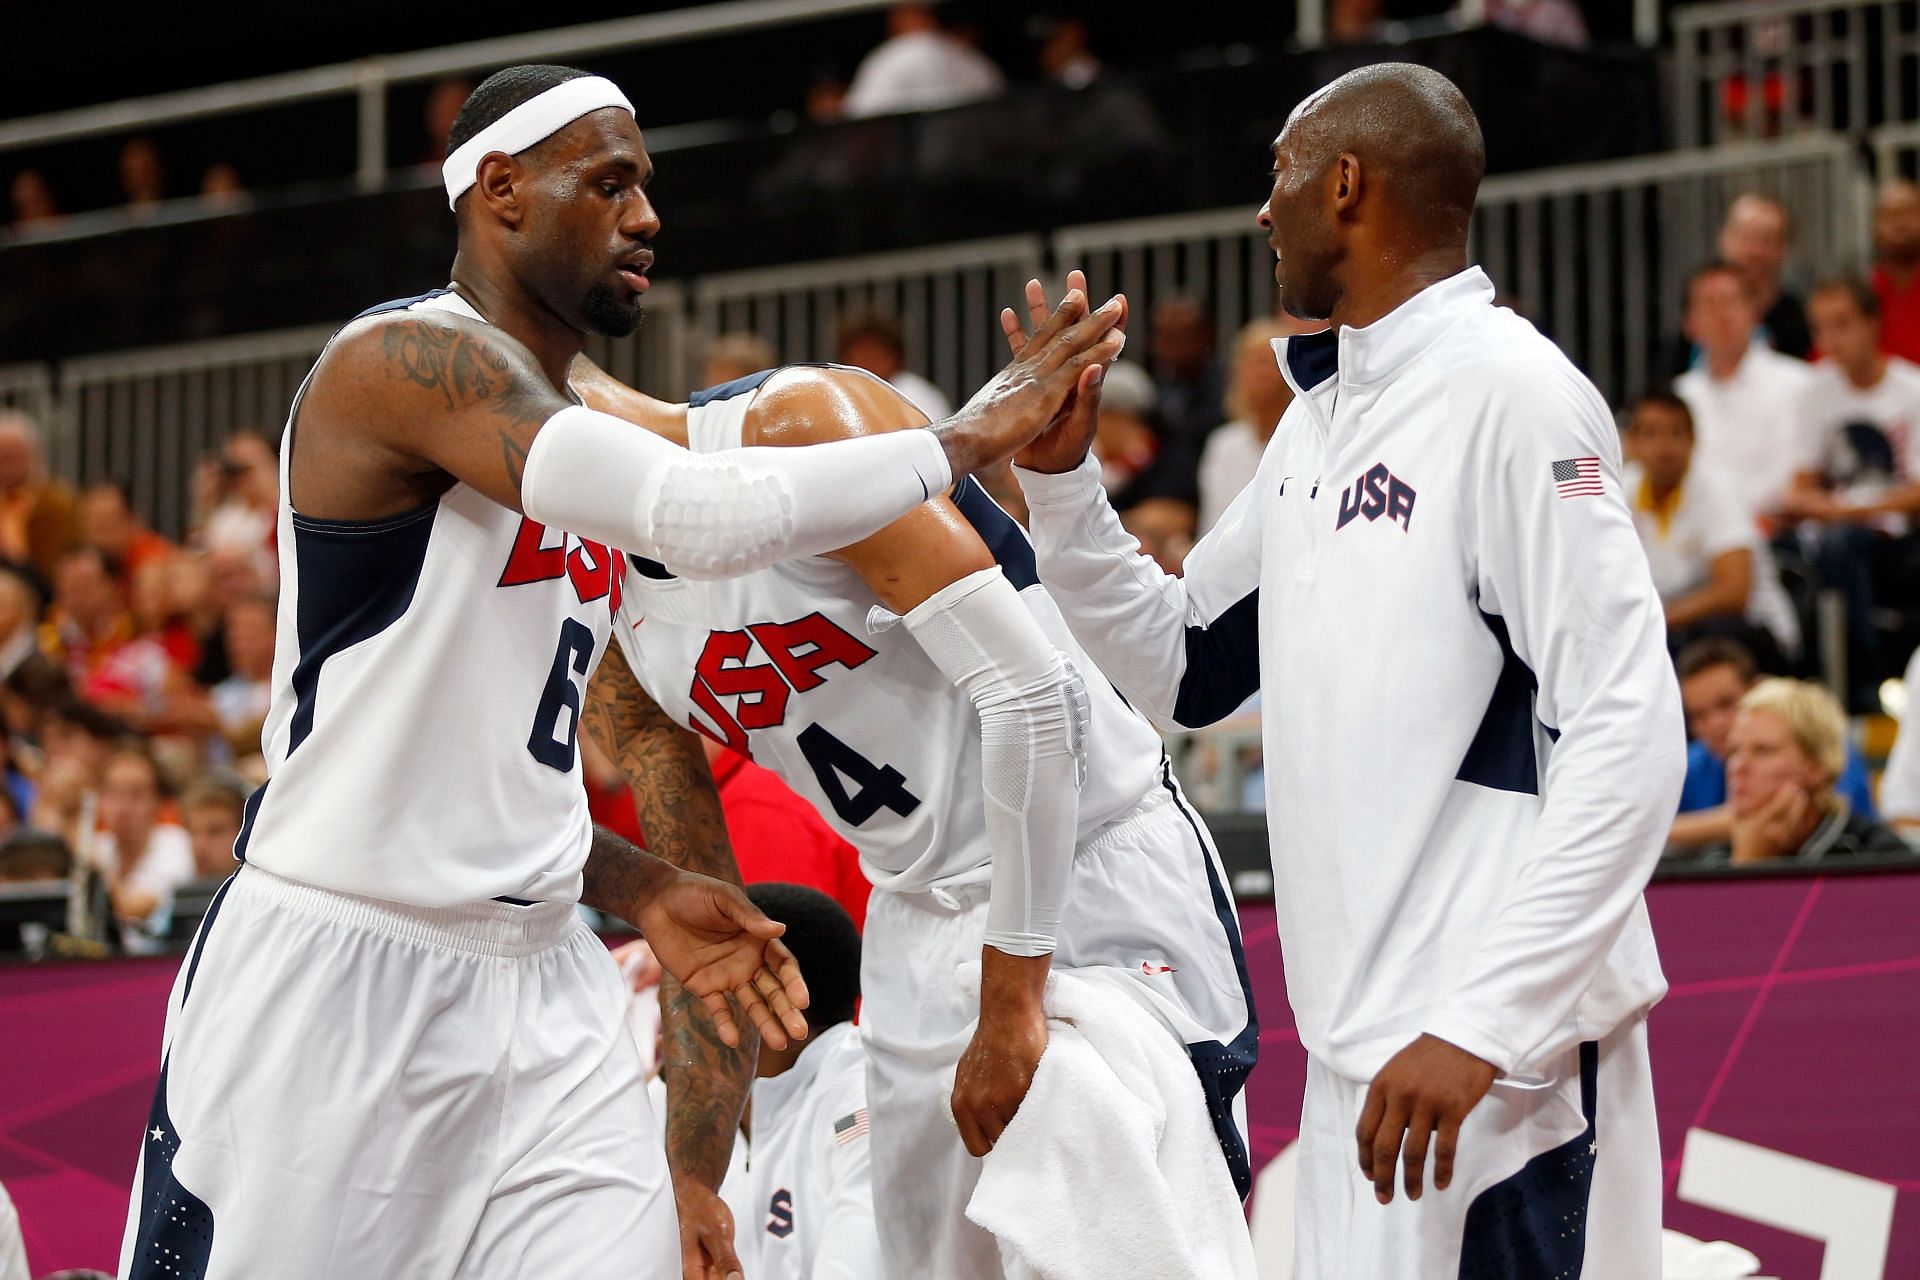 LeBron James and Kobe Bryant in the olympics team